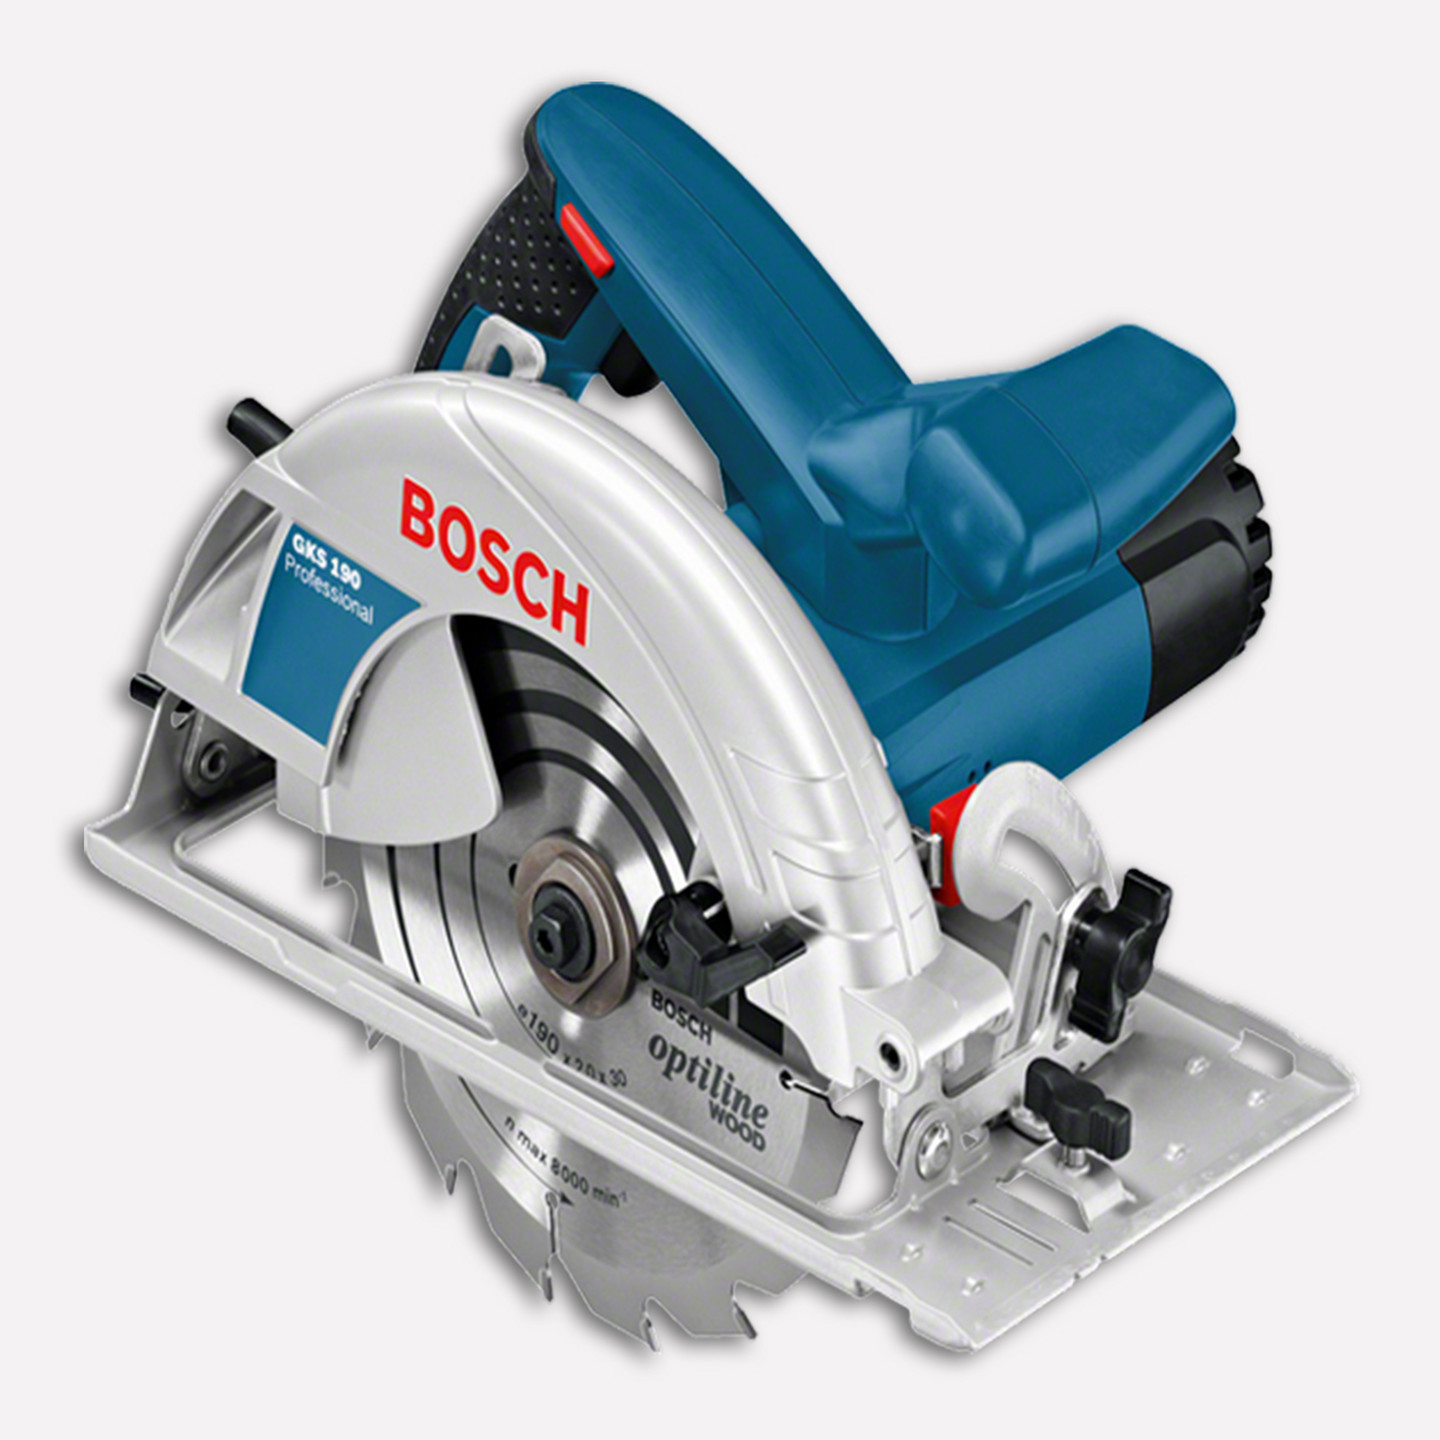 Bosch%200.601.623.000%20-%20Gks%20190%20Daire%20Testere%20%20BC.0601623000